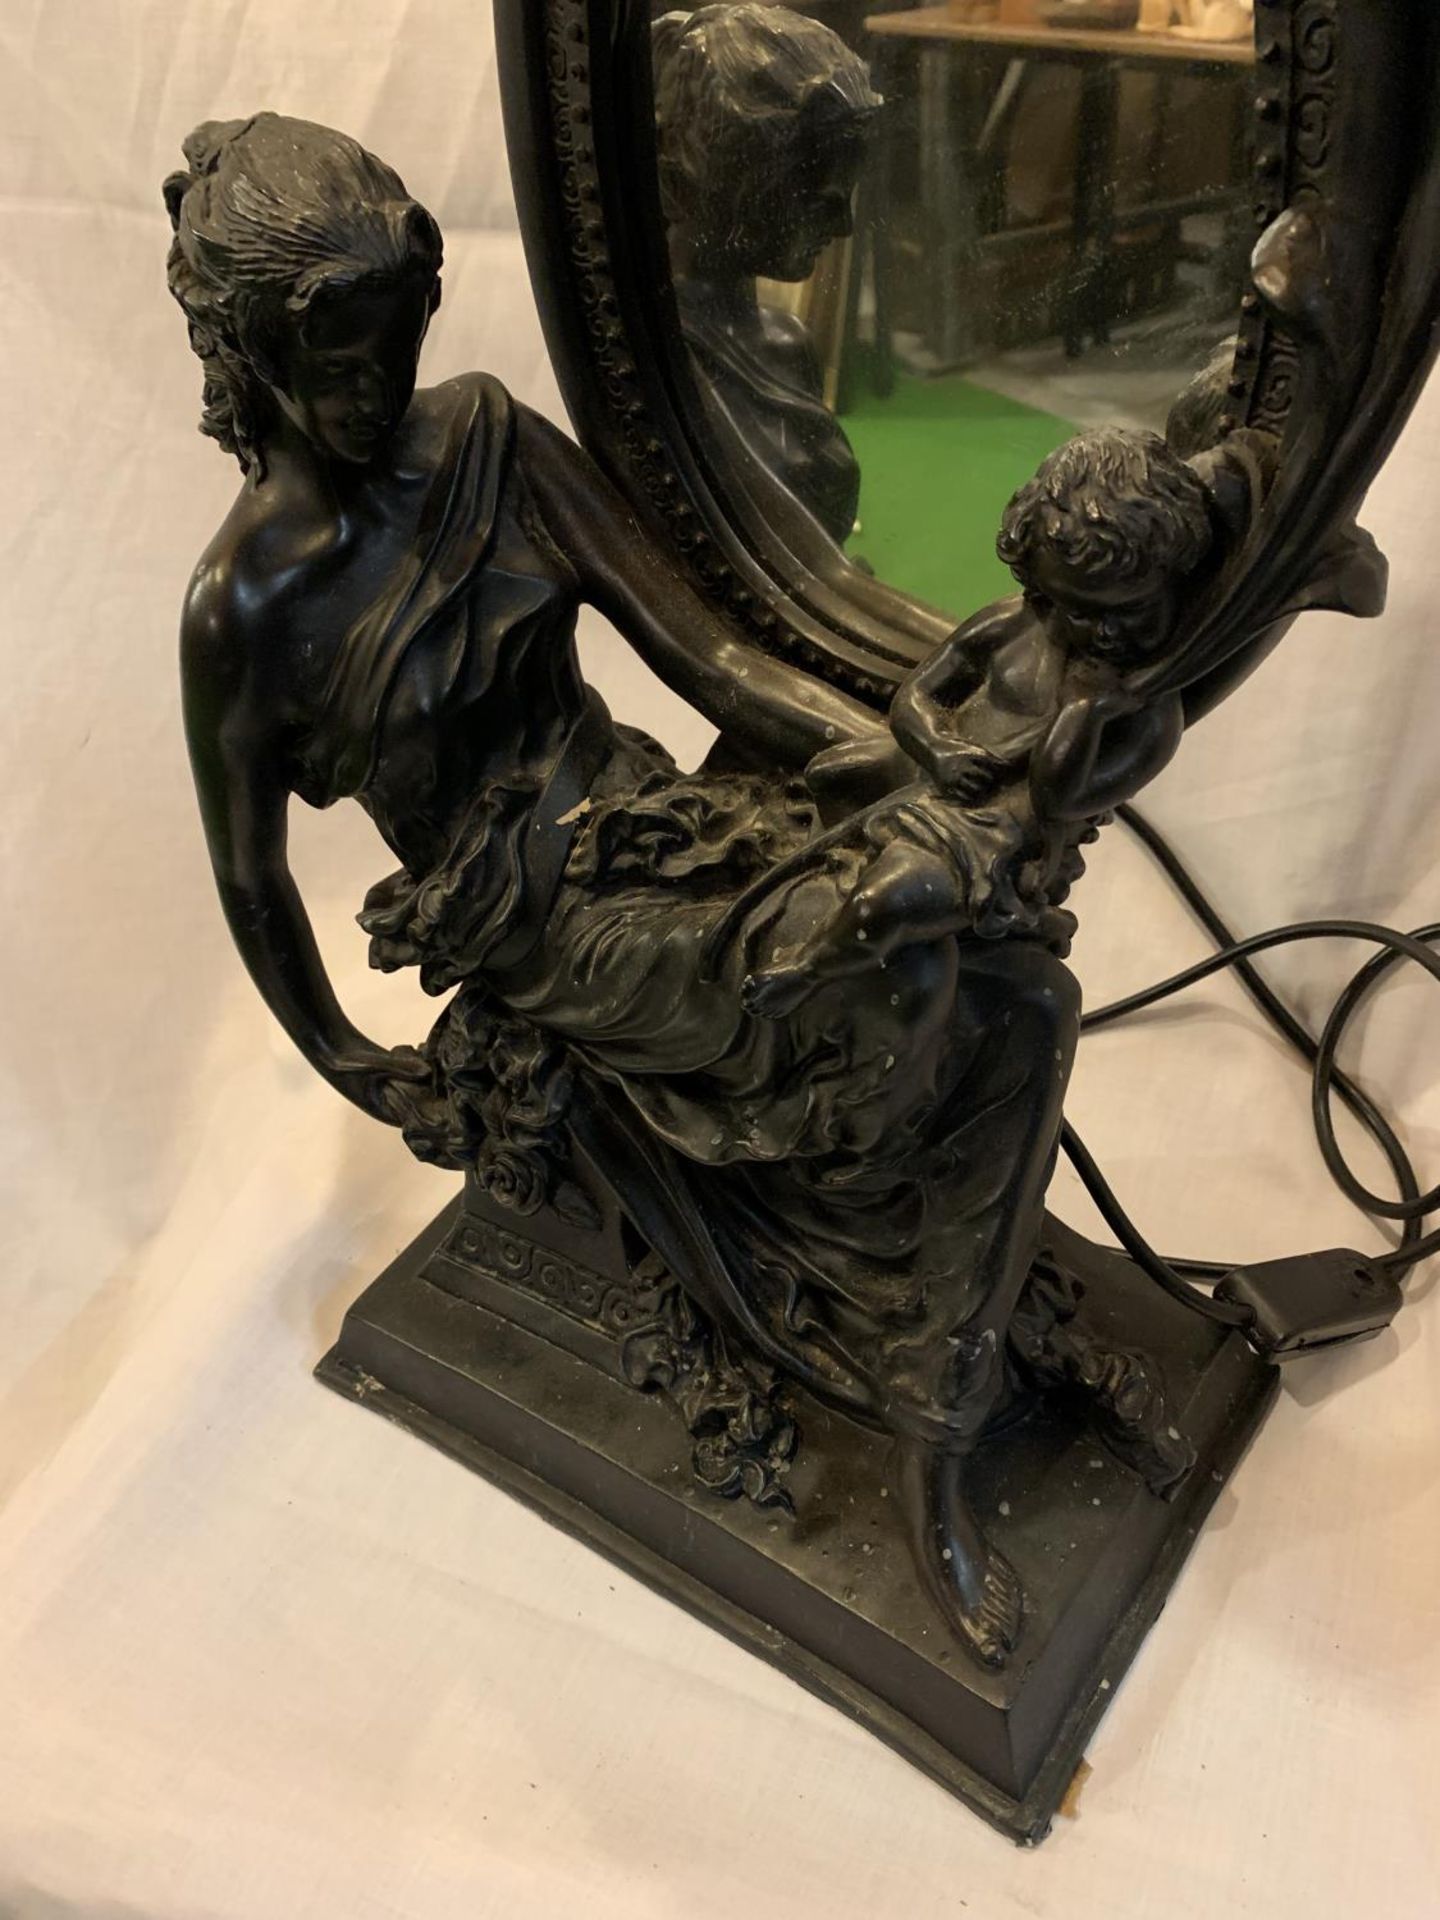 A DECORATIVE RESIN LAMP WITH MIRROR DEPICTING A MOTHER AND CHILD - Image 2 of 3